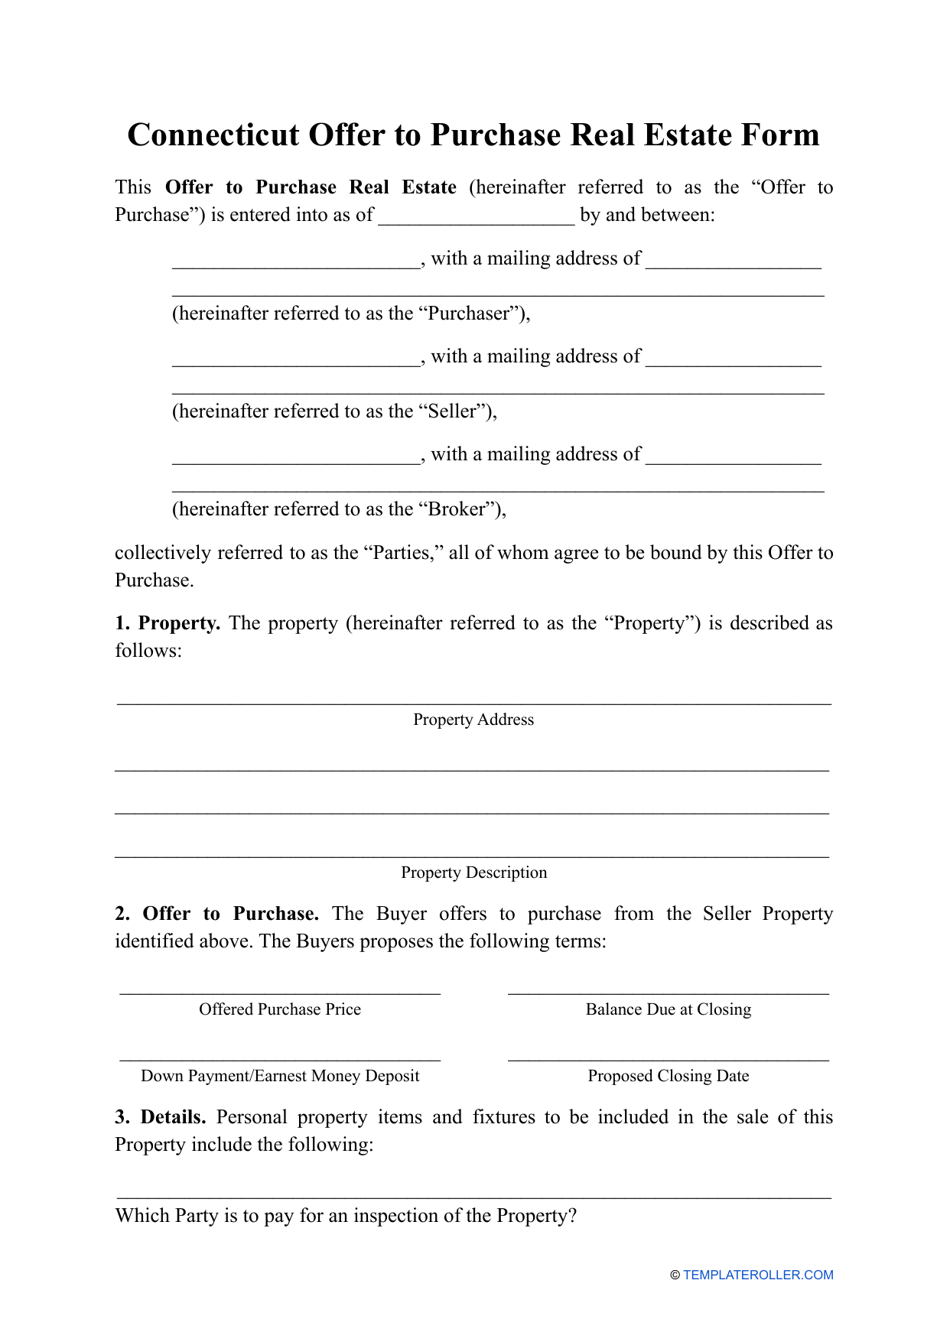 Offer to Purchase Real Estate Form - Connecticut, Page 1